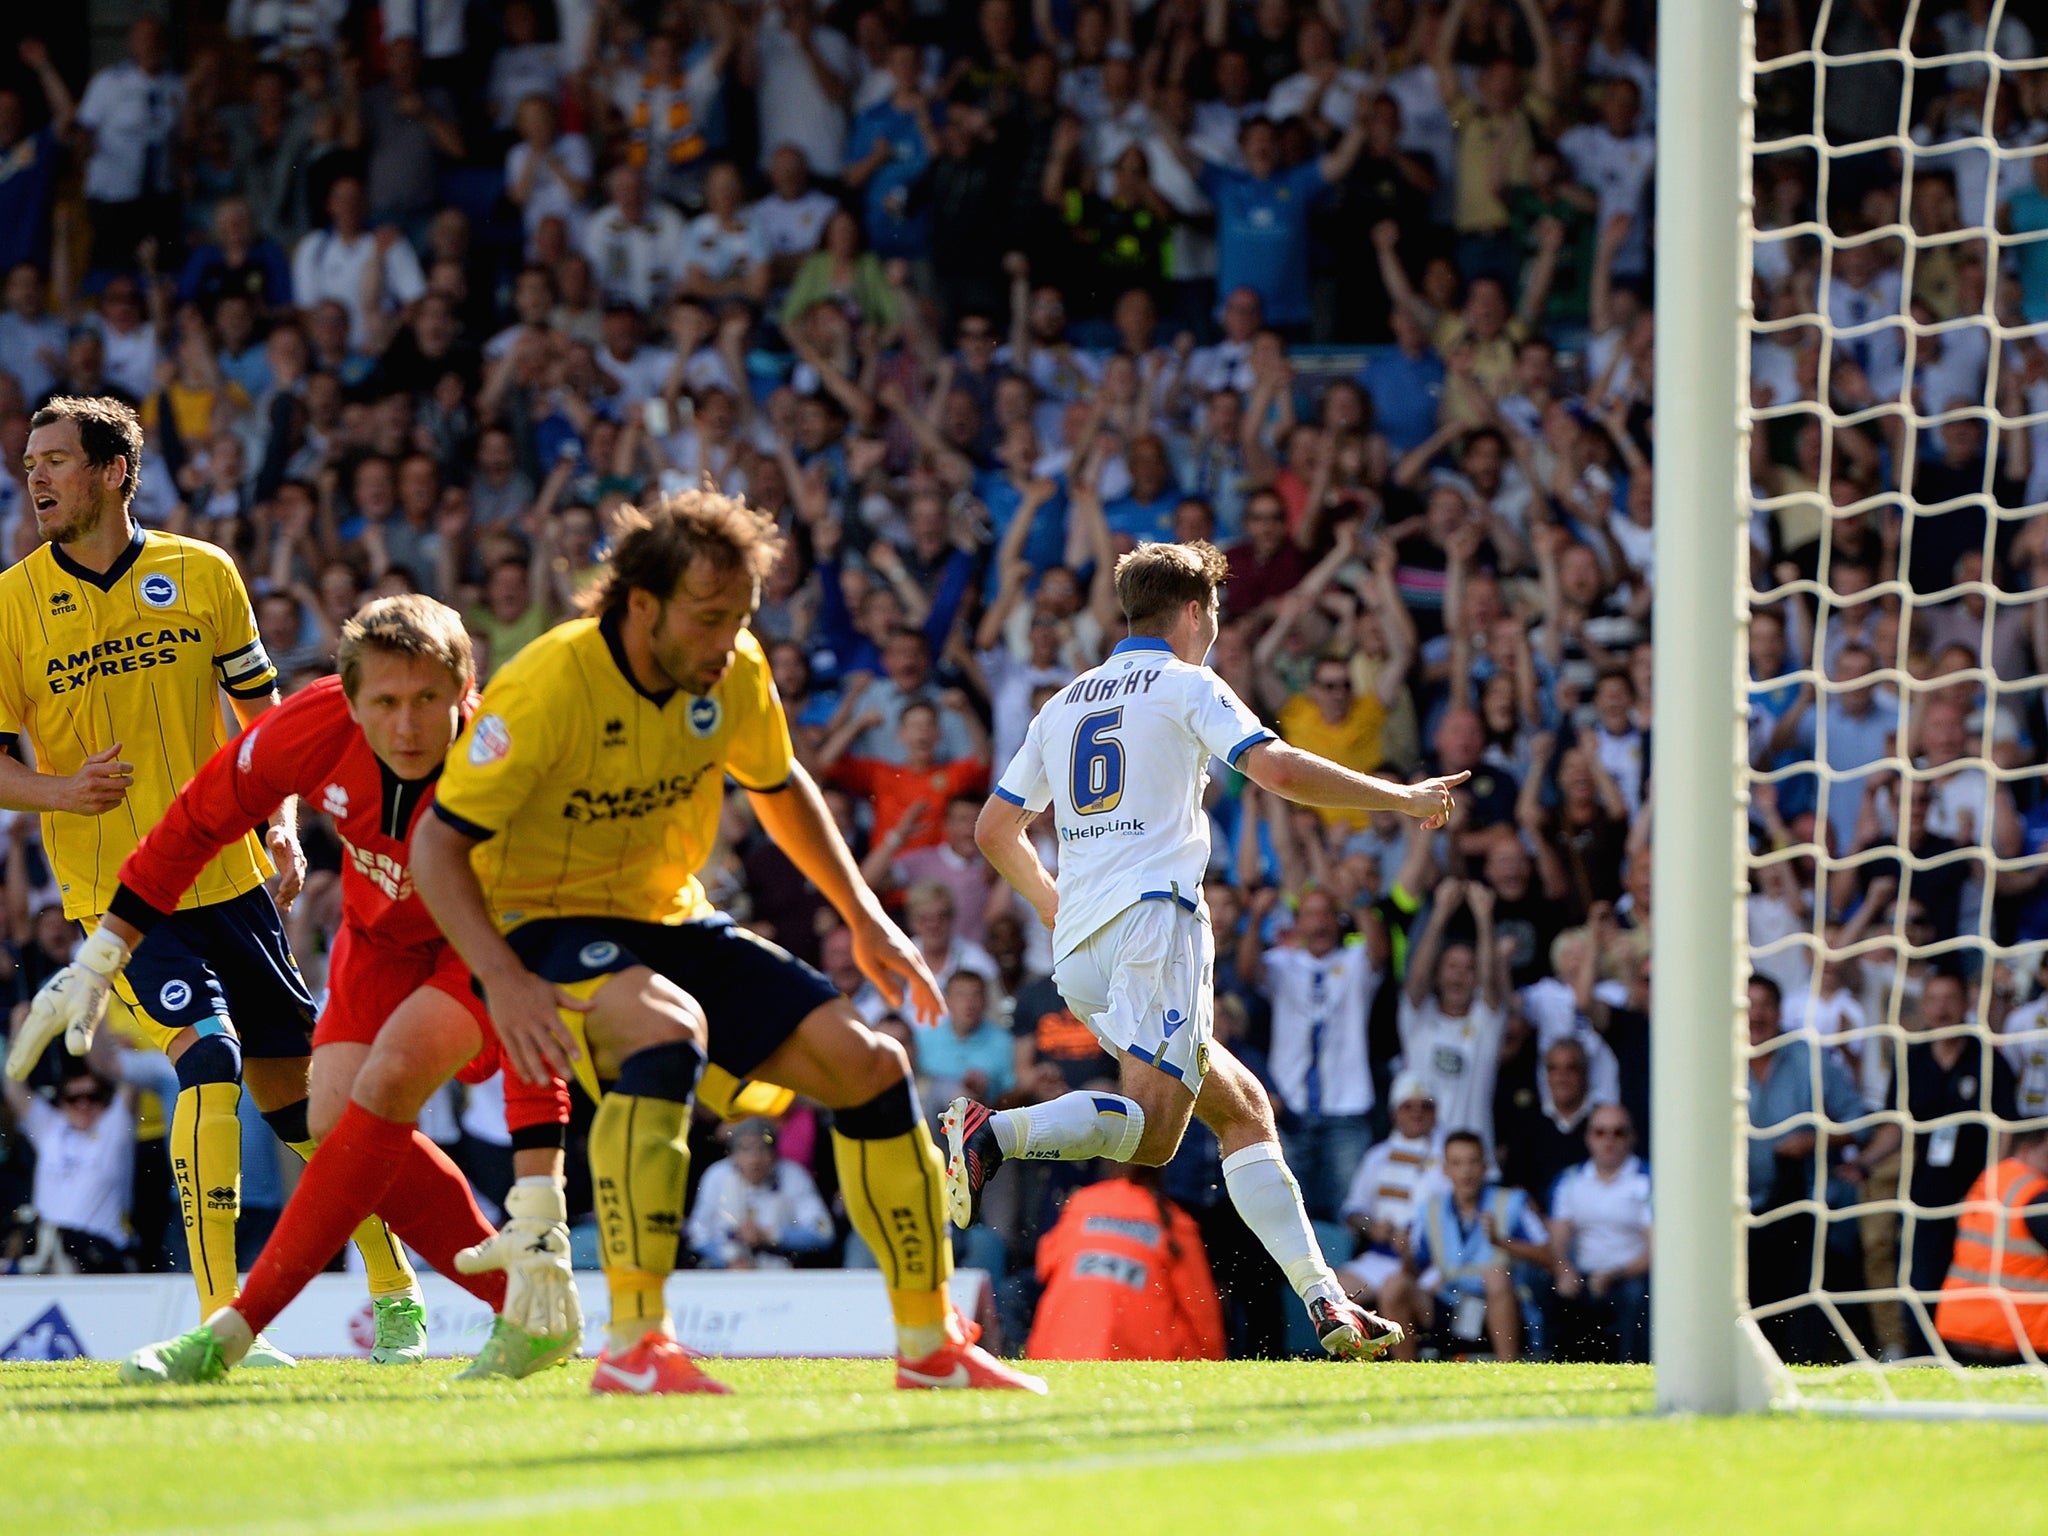 Luke Murphy turns to celebrate his late winning goal for Leeds in the 2-1 victory over Brighton